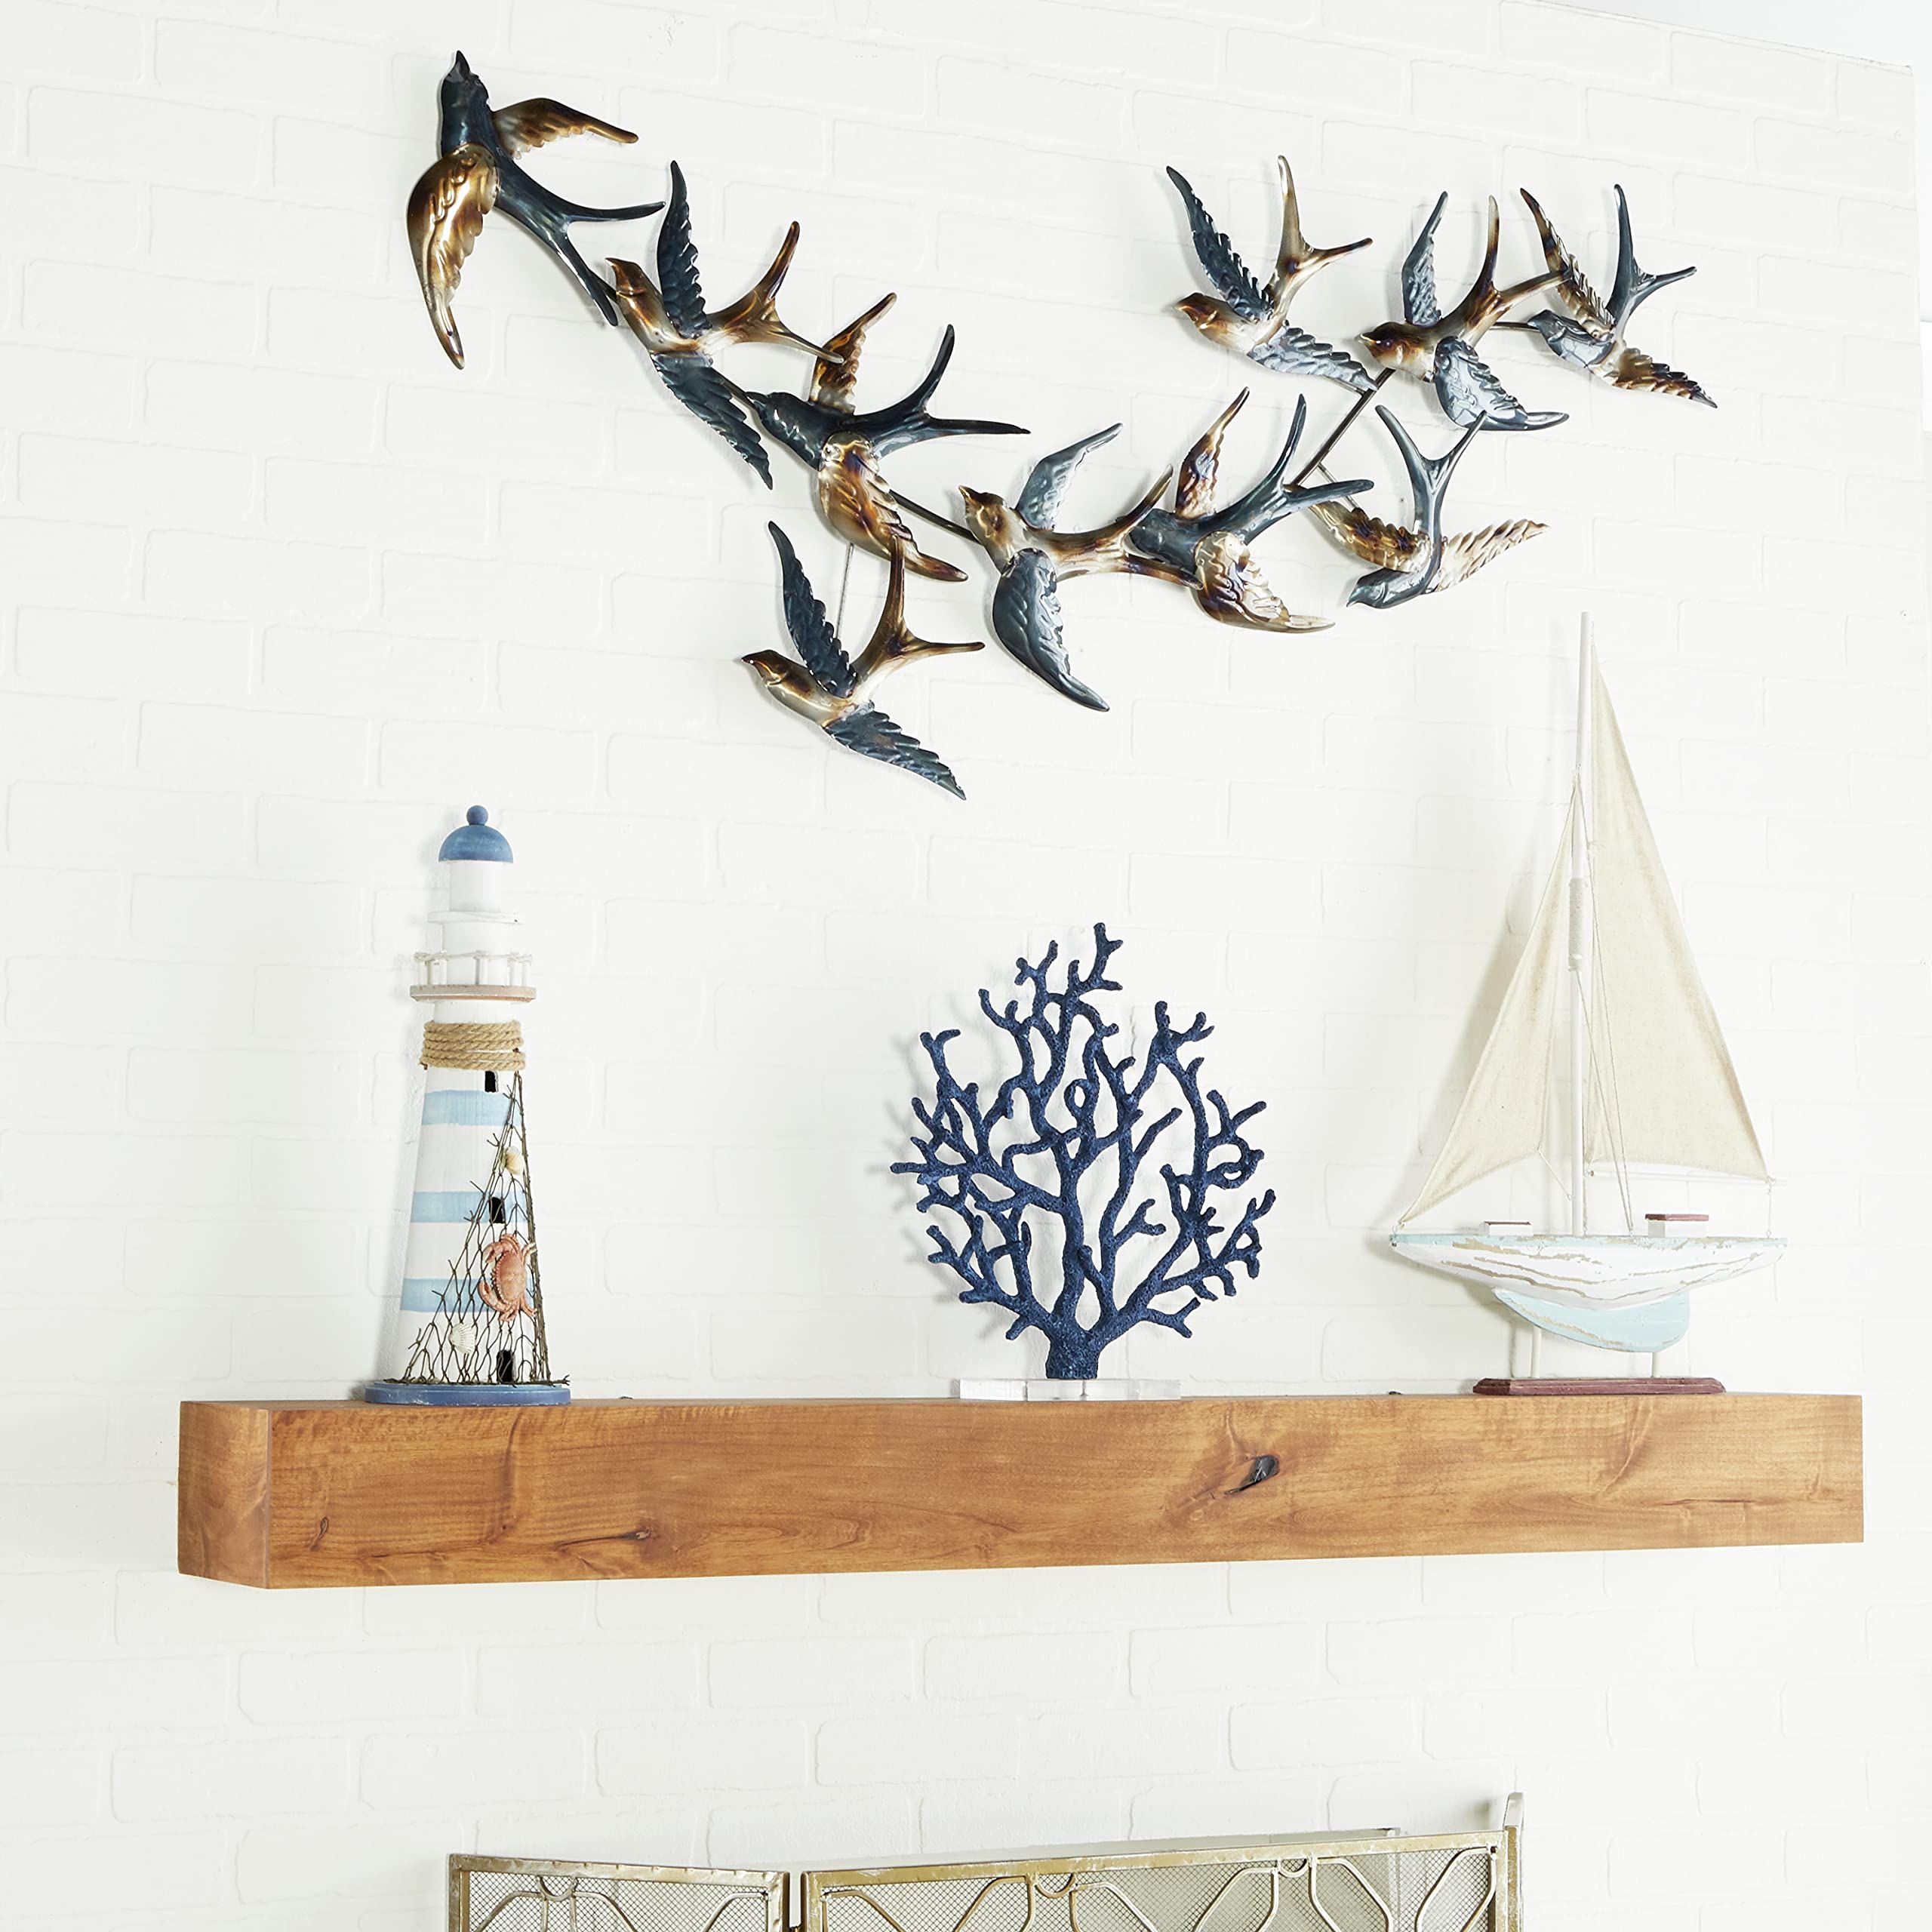 Metal Bird Wall Art Intended For Most Popular Amazon: Deco 79 Metal Bird Flying Flock Of Wall Decor, 52" X 3" X 27",  Blue : Patio, Lawn & Garden (View 10 of 15)